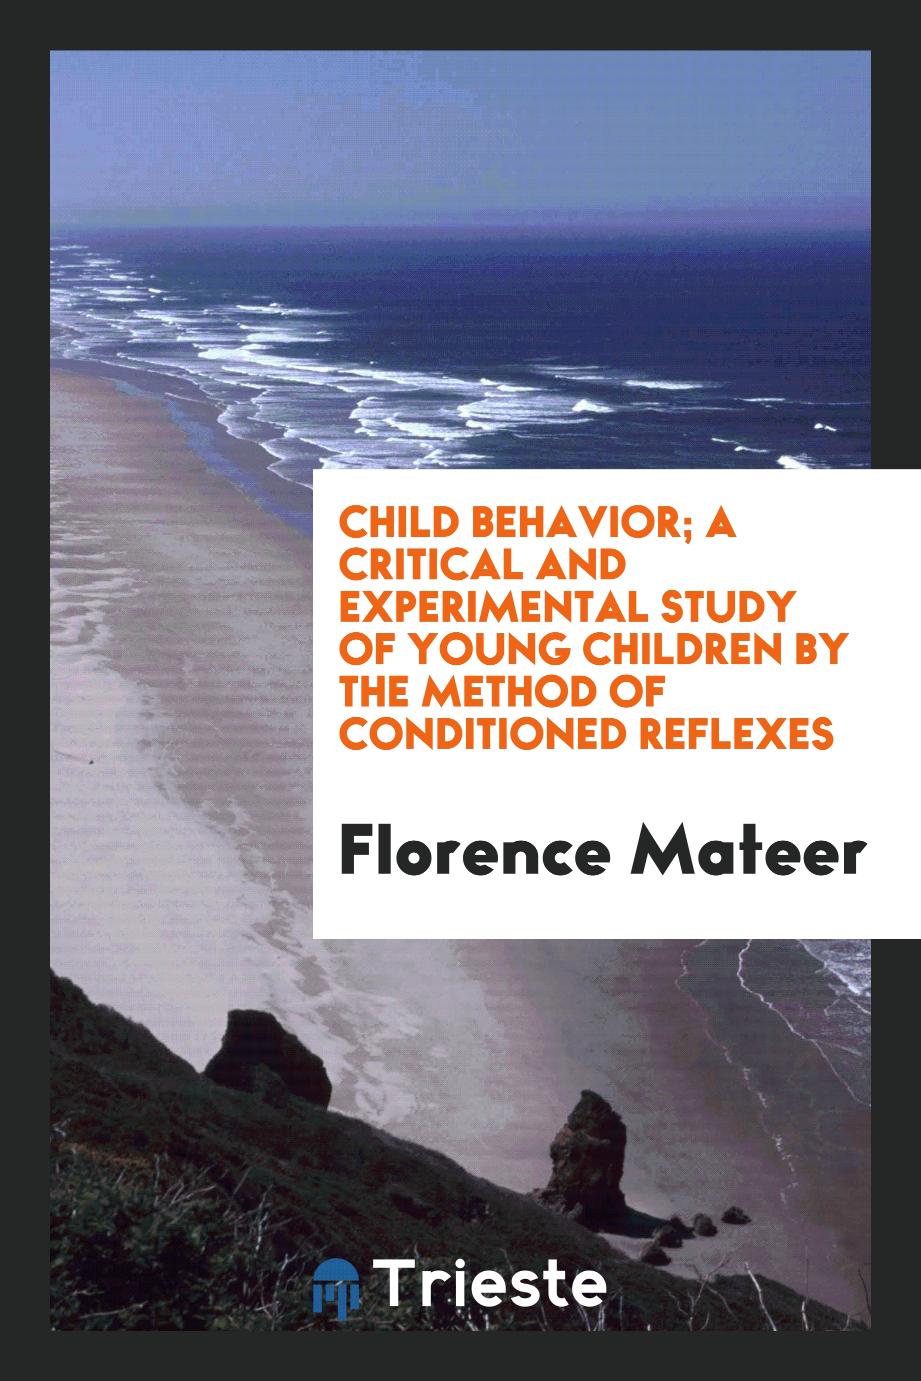 Child Behavior; A Critical and Experimental Study of Young Children by the Method of Conditioned Reflexes